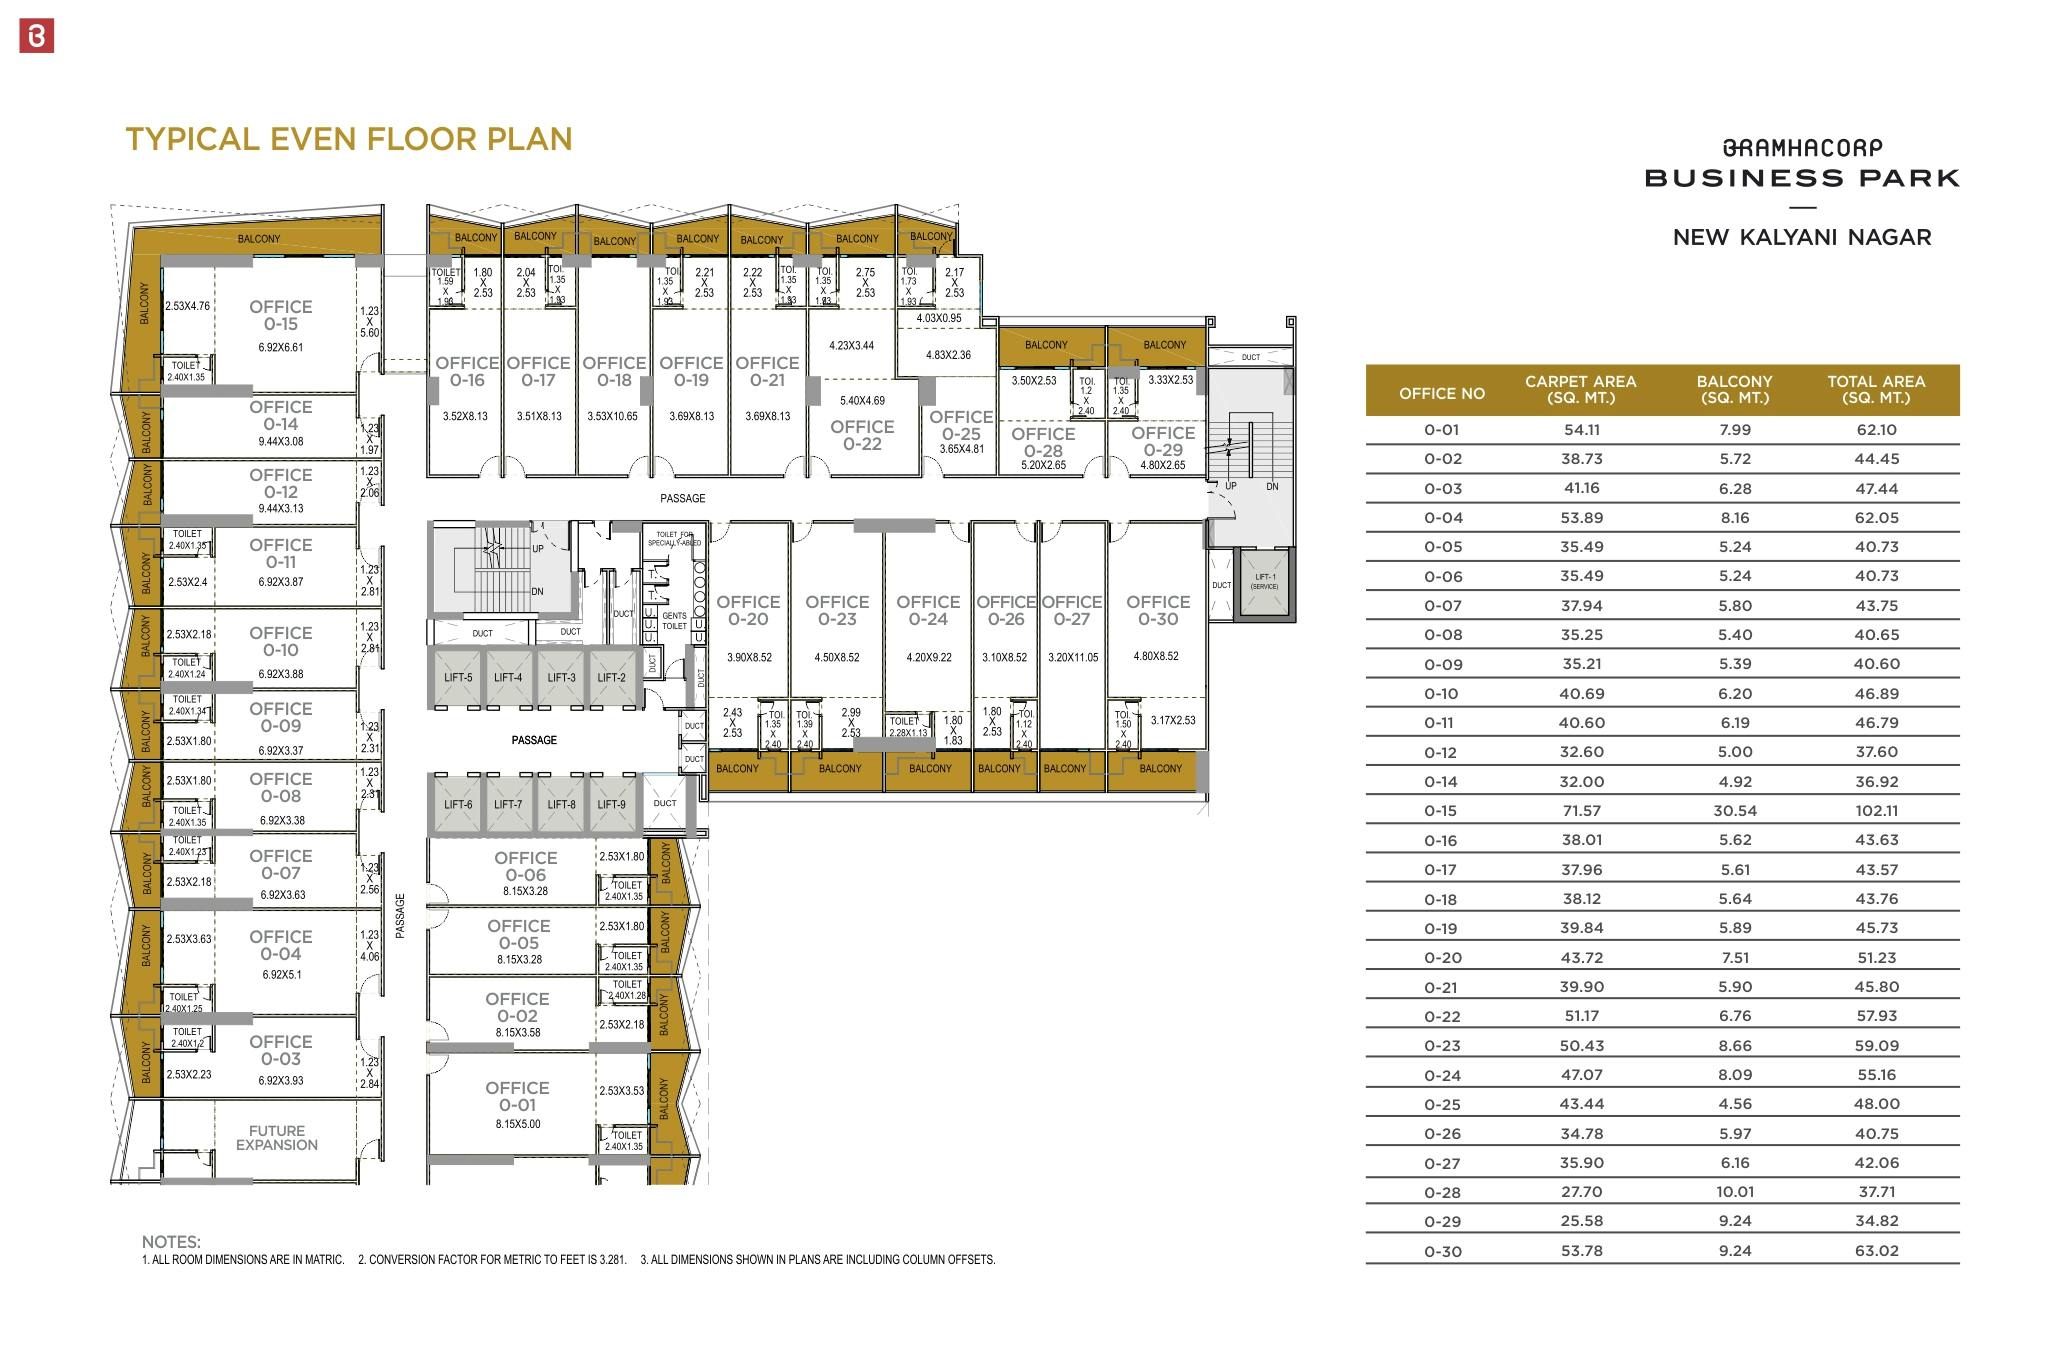 BramhaCorp Business Park Typical Even Floor Plan